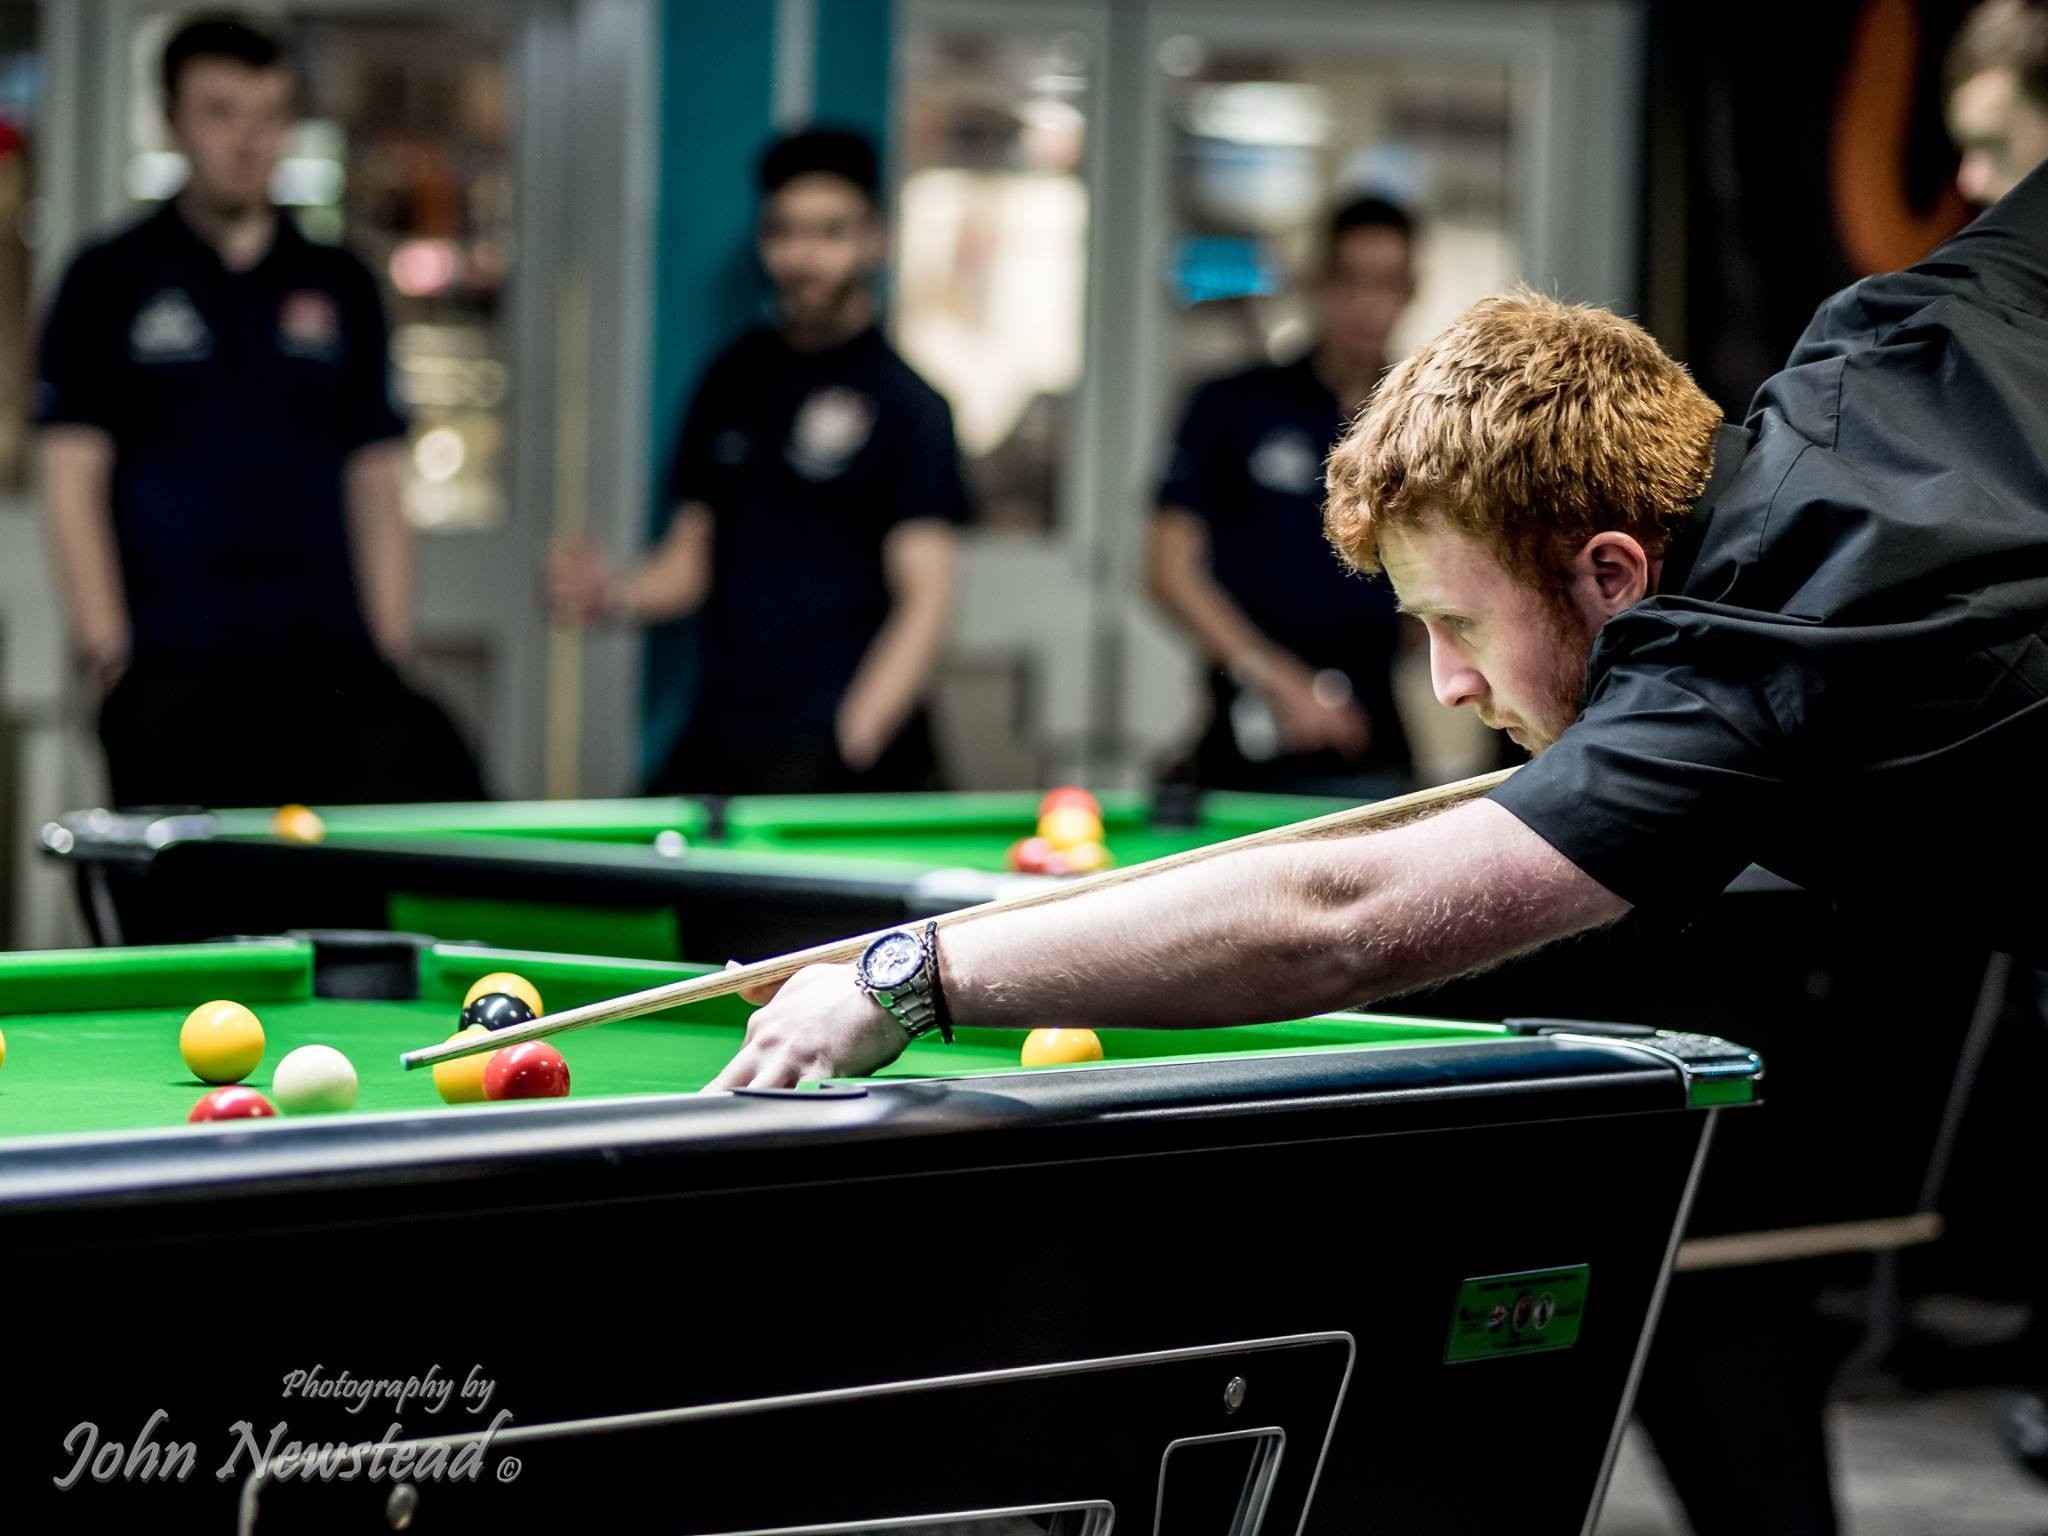 Last weekend saw the University of York Pool and Snooker Club travel down to Great Yarmouth to attend the annual BUCS 8 ball pool championships